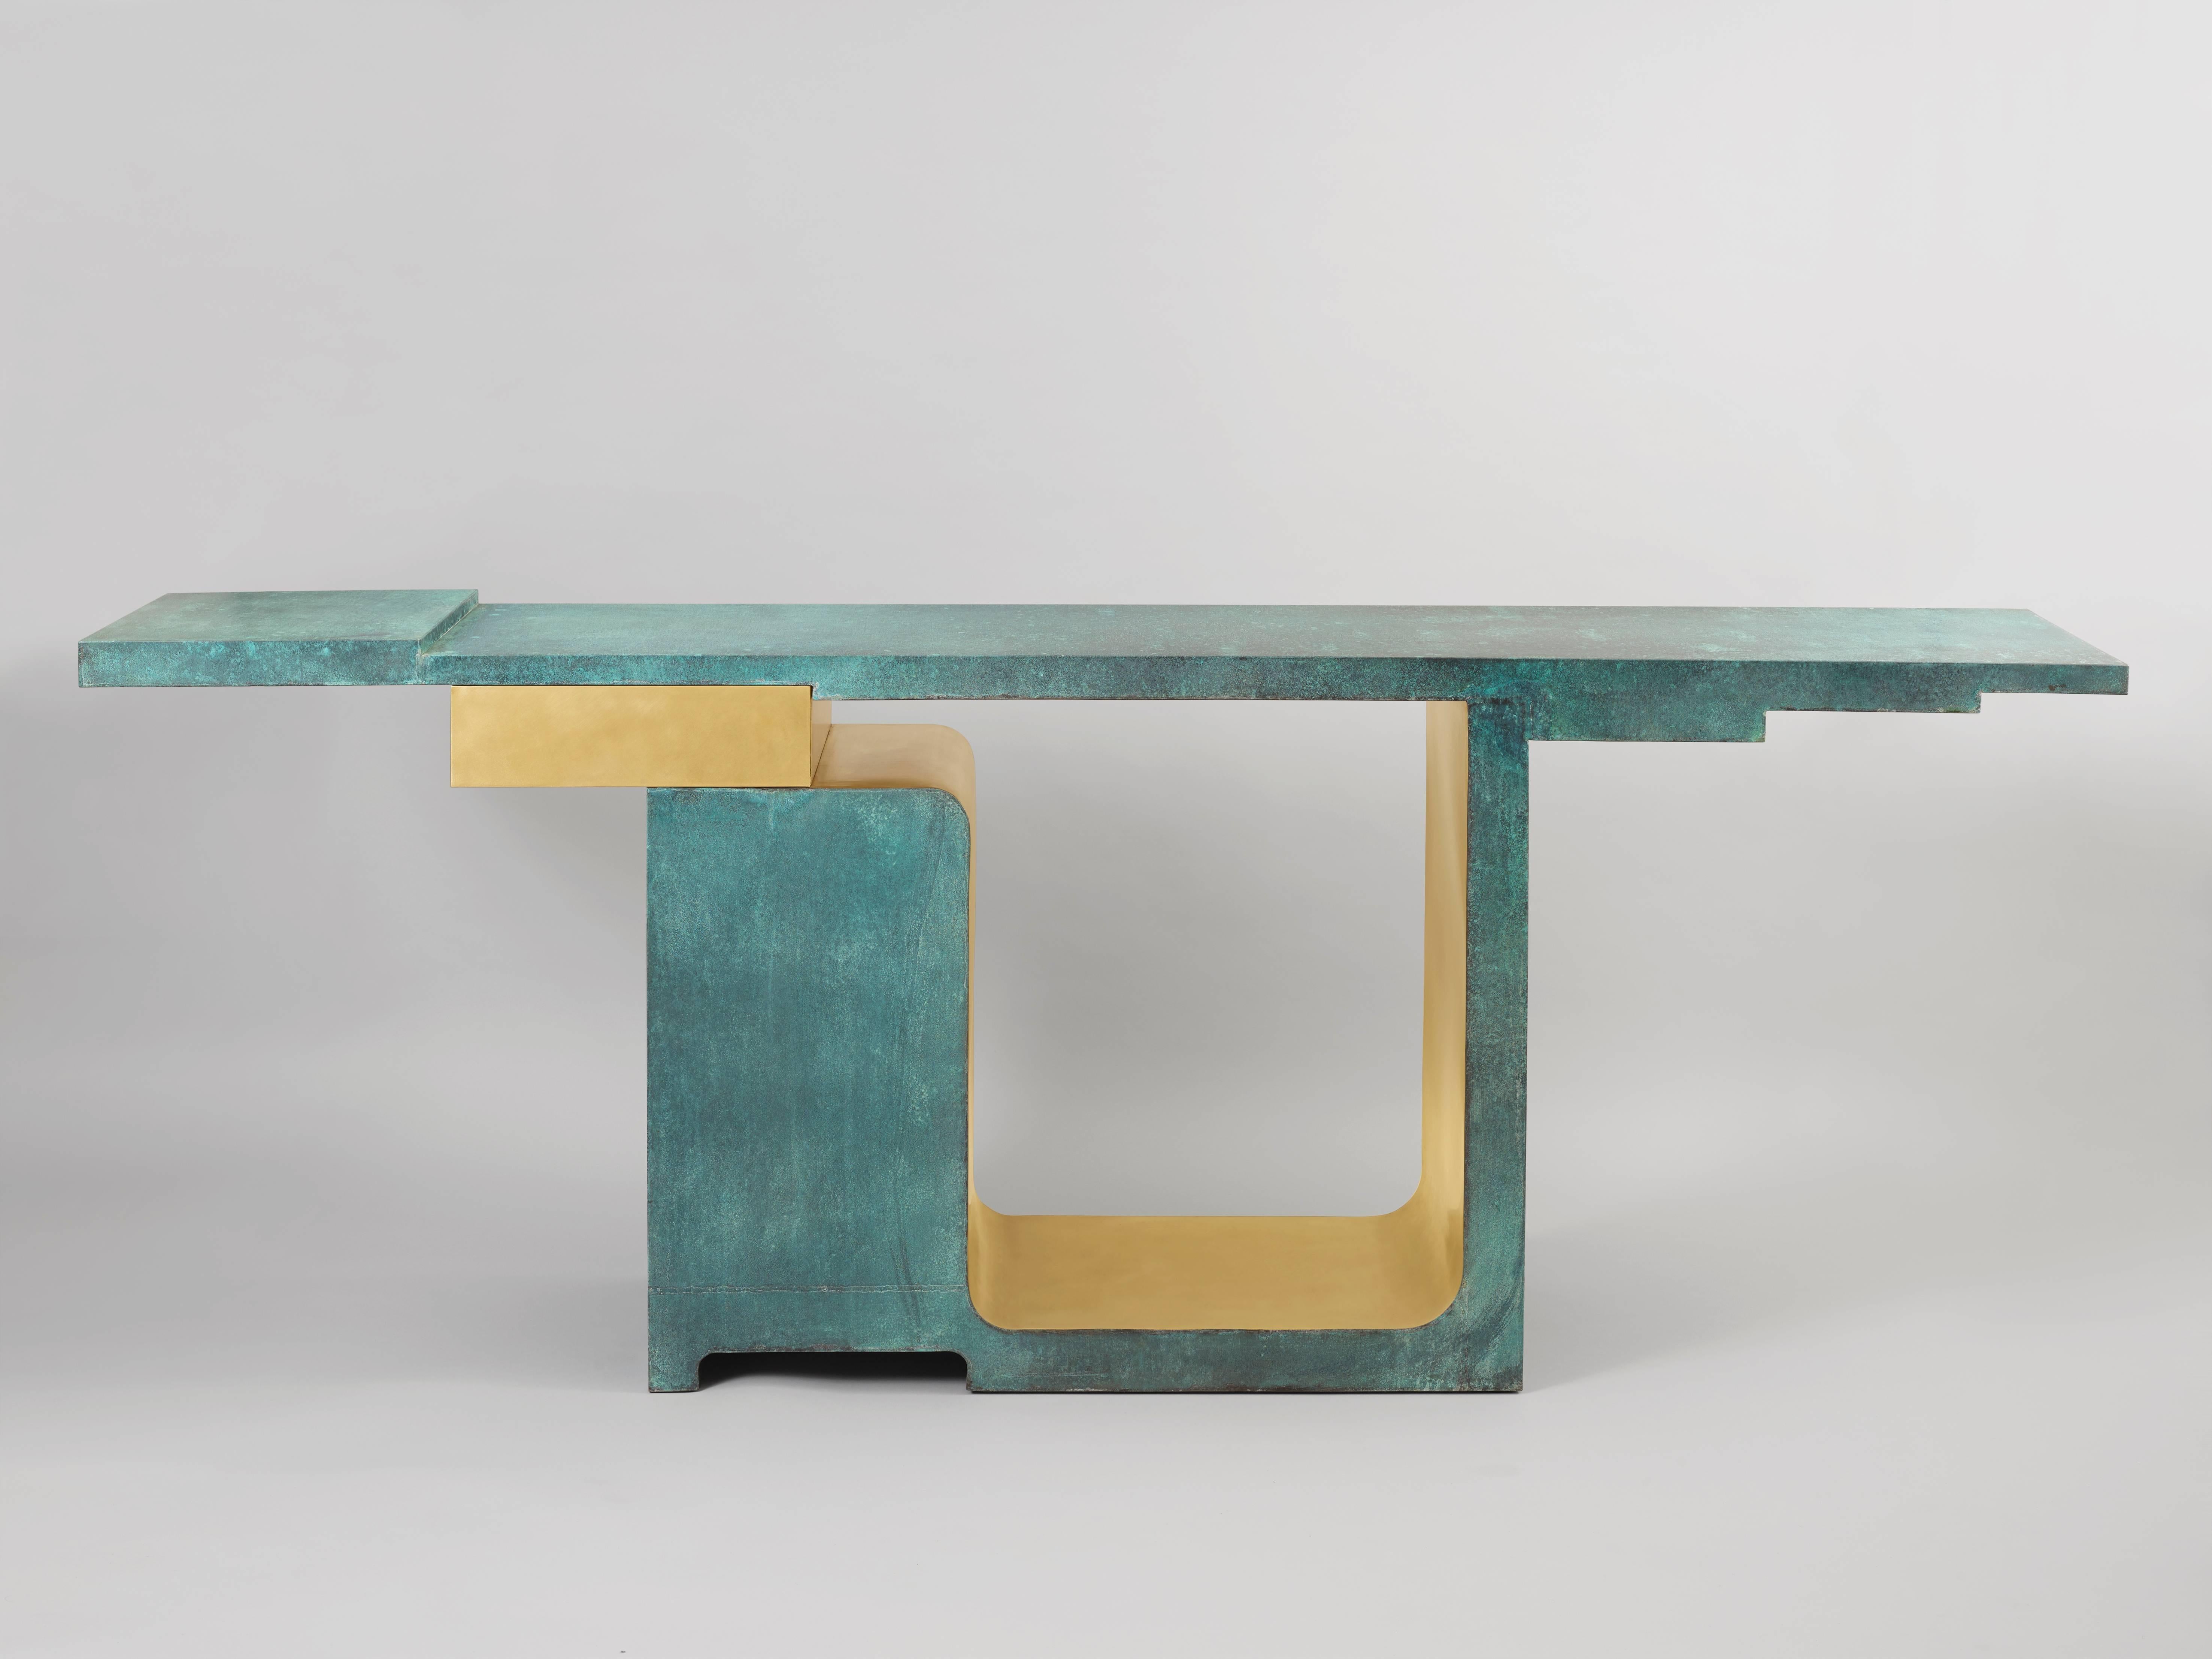 'XiangSheng I' Console is an impressive collectible design work that combines surfaces in brushed bronze with a refined champagne color and surfaces in oxidized bronze with a deep Etruscan green patina. It is part of the ‘XiangSheng’ furniture